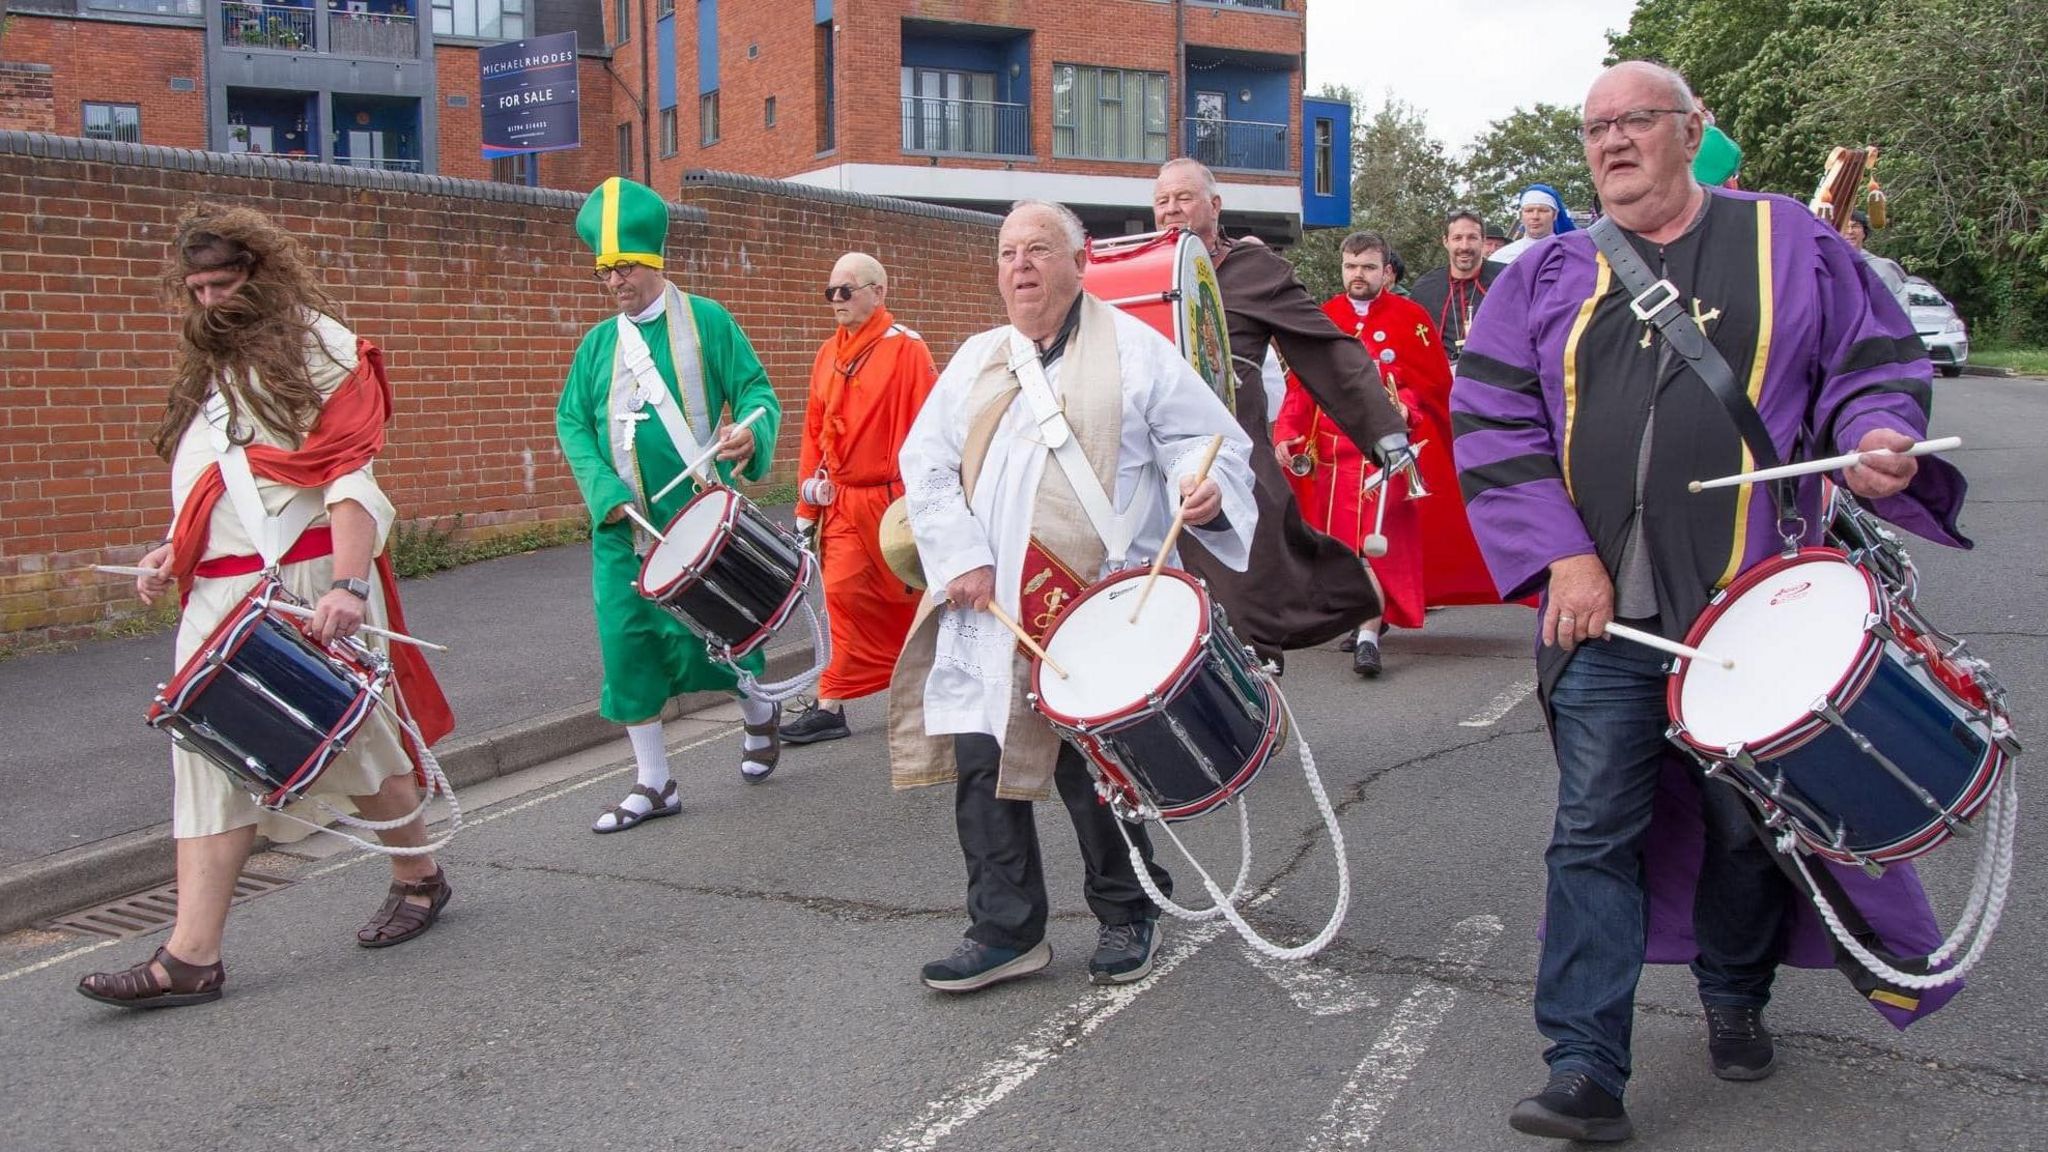 Several men dressed in different fancy dress costumes walk along the road carrying drums.